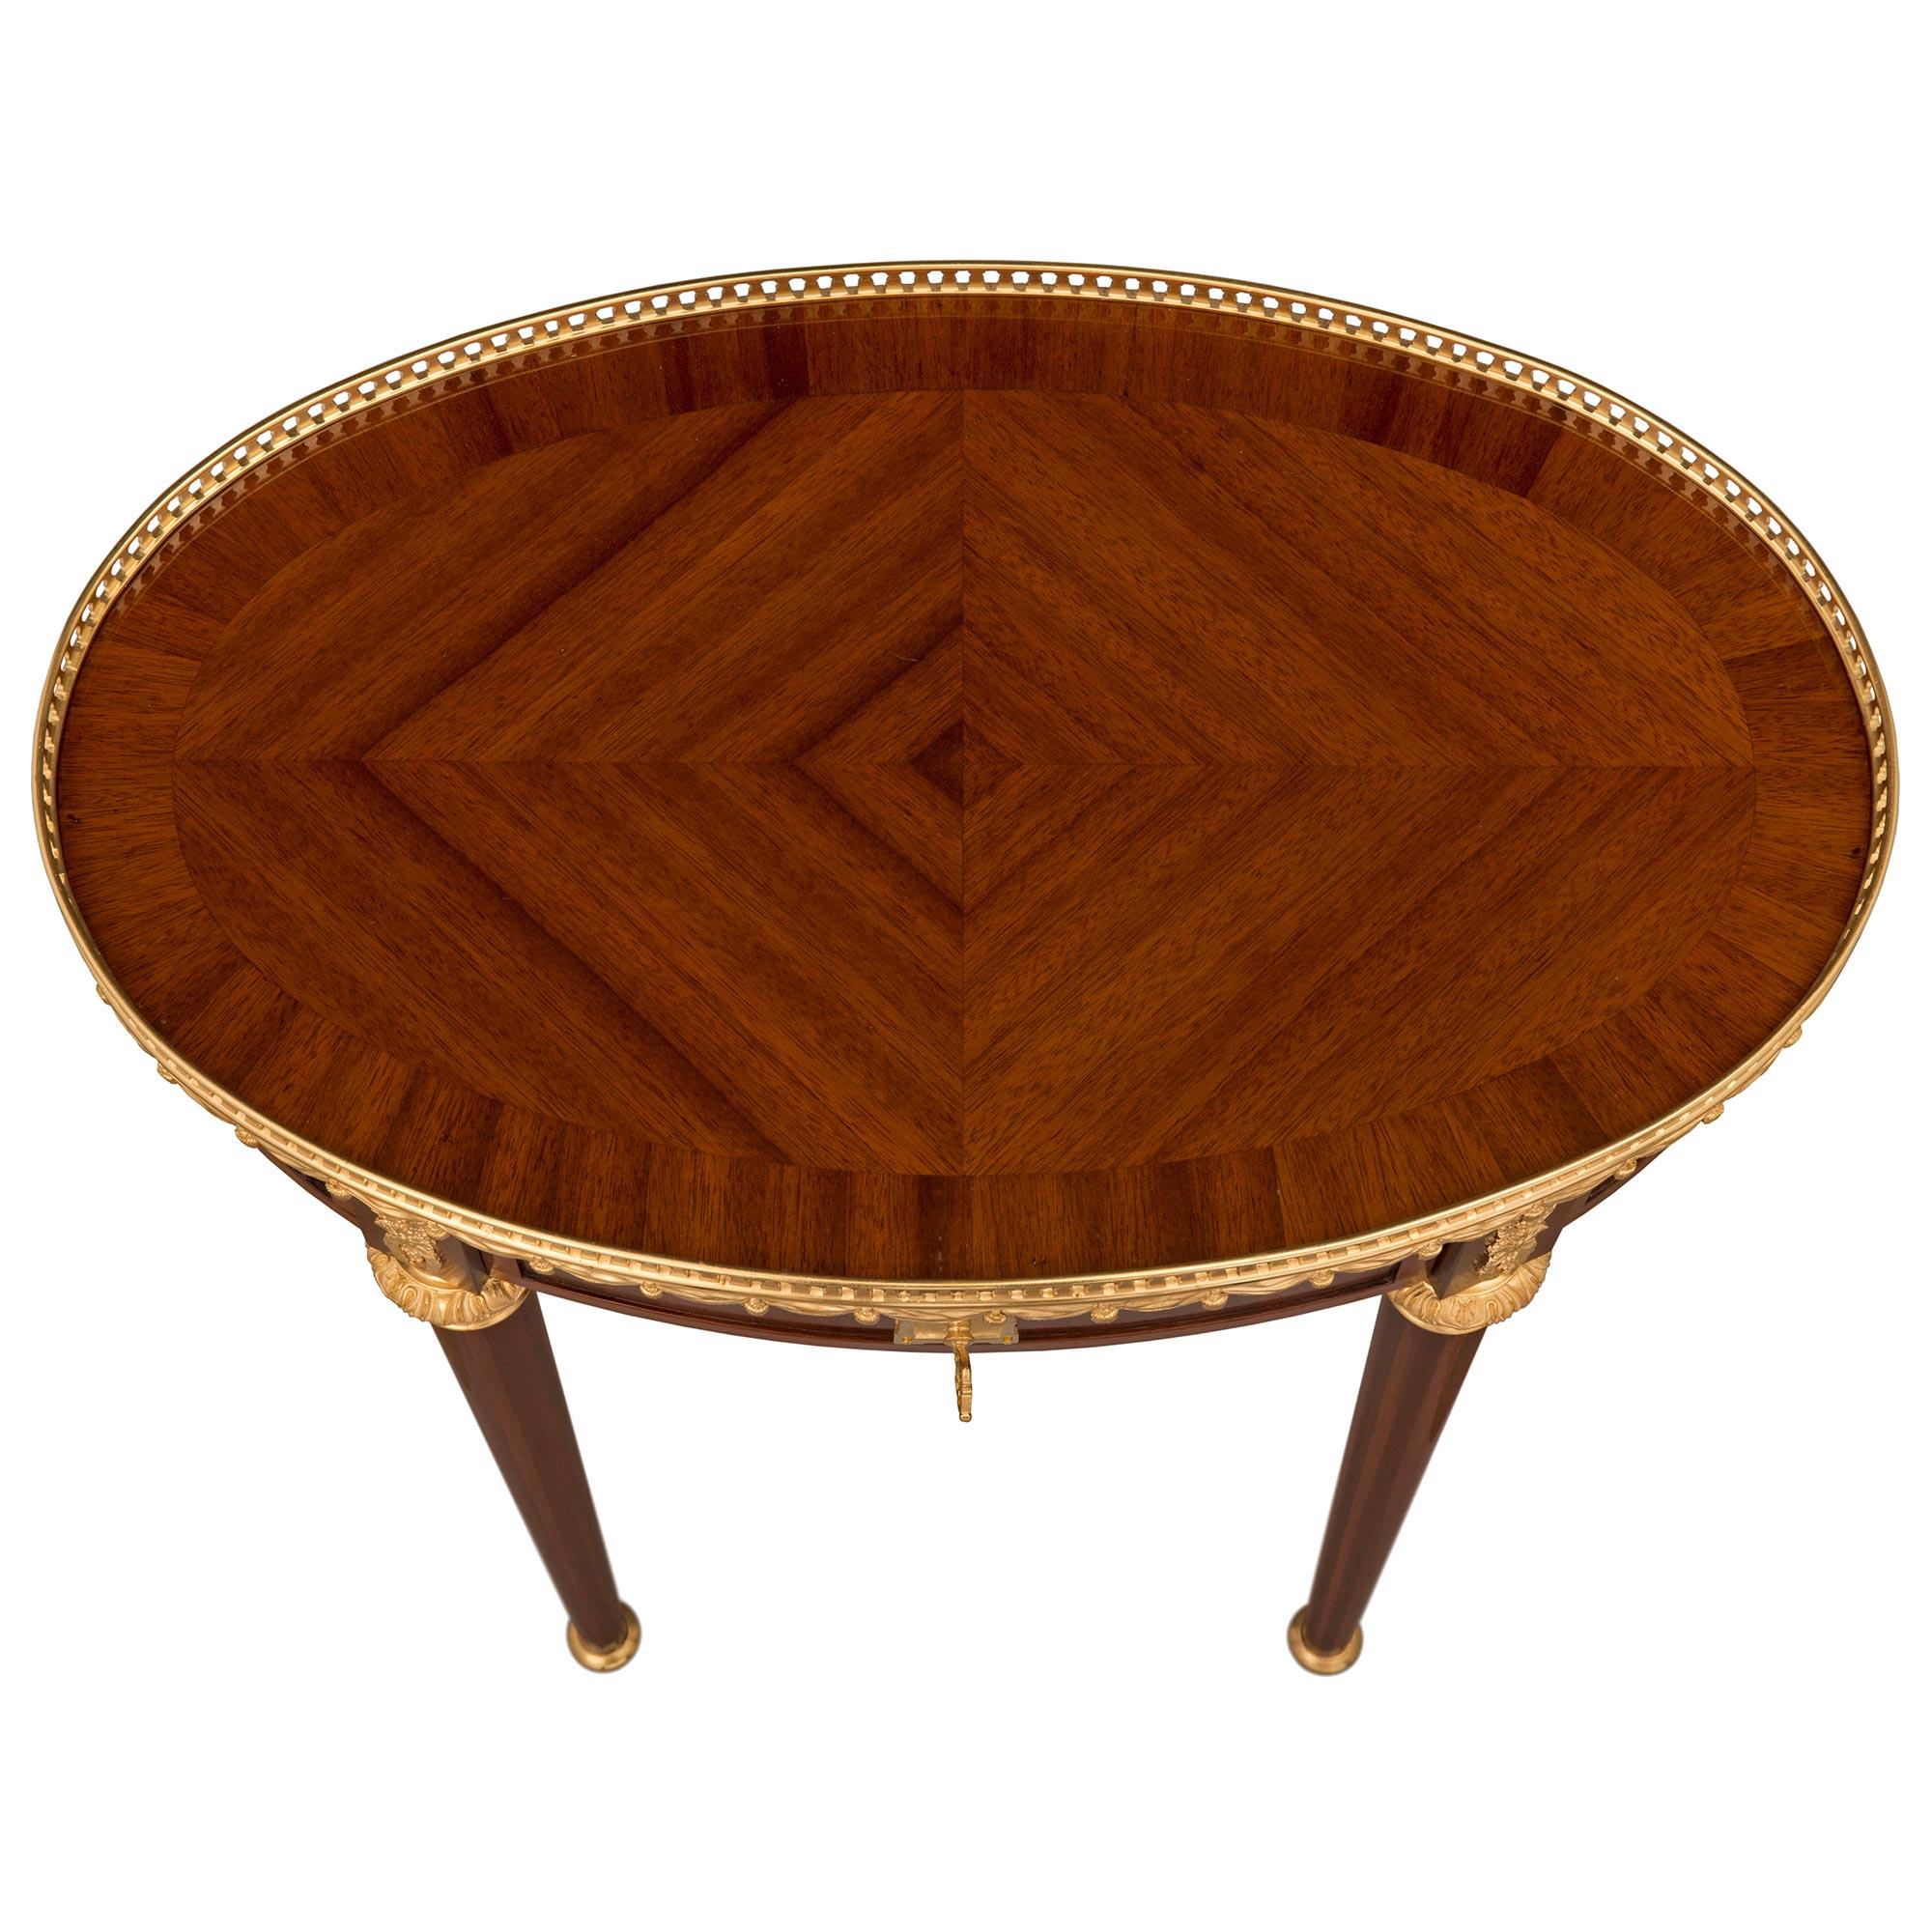 An elegant and very high quality French 19h century Louis XVI st. Belle Époque period Mahogany and ormolu side table signed by Maison Krieger. The oblong shaped one drawer table is raised by slender circular tapered legs with fine topie shaped ball